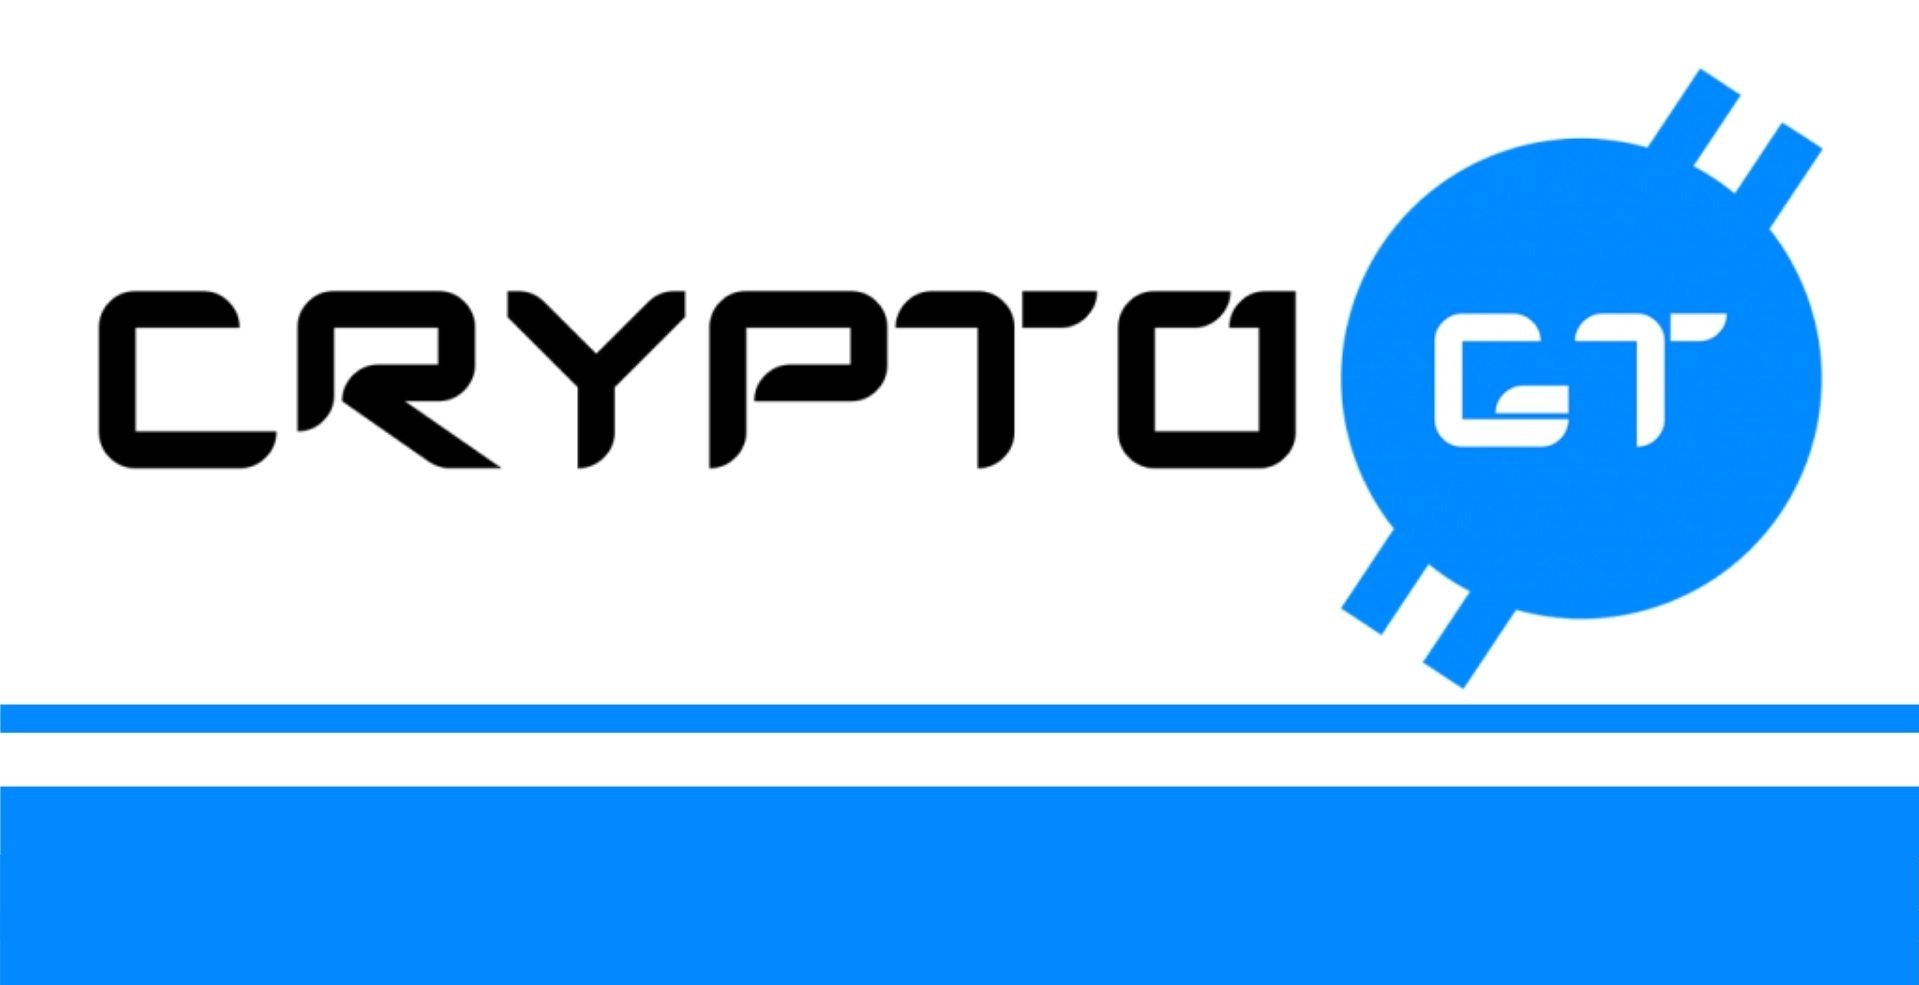 CryptoGT(クリプトGT）のロゴ